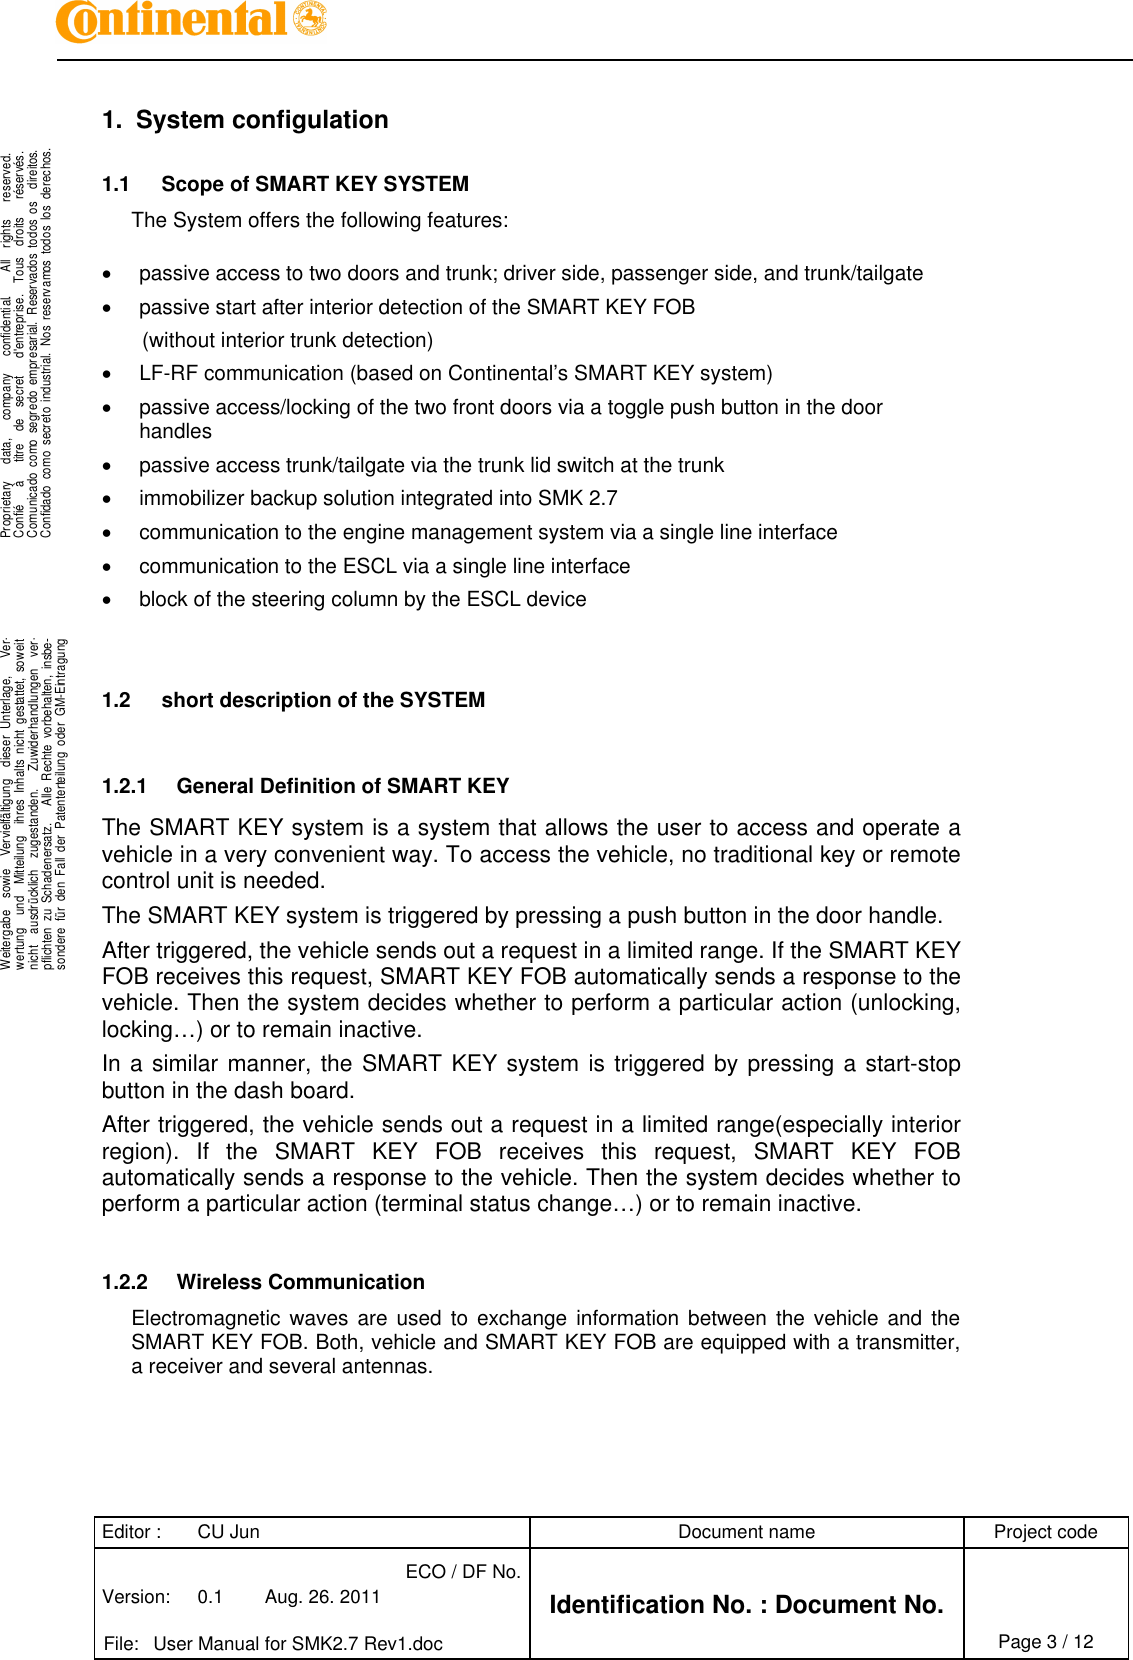 Editor : CU Jun Document name Project codeVersion: 0.1 Aug. 26. 2011ECO / DF No.Identification No. : Document No.File: User Manual for SMK2.7 Rev1.doc Page 3 / 12.Proprietary data, company confidential. All rights reserved.Confié à titre de secret d&apos;entreprise. Tous droits réservés.Comunicado como segredo empresarial. Reservados todos os direitos.Confidado como secreto industrial. Nos reservamos todos los derechos...Weitergabe sowie Vervielfältigung dieser Unterlage, Ver-wertung und Mitteilung ihres Inhalts nicht gestattet, soweitnicht ausdrücklich zugestanden. Zuwiderhandlungen ver-pflichten zu Schadenersatz. Alle Rechte vorbehalten, insbe-sondere für den Fall der Patenterteilung oder GM-Eintragung..1. System configulation1.1 Scope of SMART KEY SYSTEMThe System offers the following features:passive access to two doors and trunk; driver side, passenger side, and trunk/tailgatepassive start after interior detection of the SMART KEY FOB(without interior trunk detection)LF-RF communication (based on Continental’s SMART KEY system)passive access/locking of the two front doors via a toggle push button in the doorhandlespassive access trunk/tailgate via the trunk lid switch at the trunkimmobilizer backup solution integrated into SMK 2.7communication to the engine management system via a single line interfacecommunication to the ESCL via a single line interfaceblock of the steering column by the ESCL device1.2 short description of the SYSTEM1.2.1 General Definition of SMART KEYThe SMART KEY system is a system that allows the user to access and operate avehicle in a very convenient way. To access the vehicle, no traditional key or remotecontrol unit is needed.The SMART KEY system is triggered by pressing a push button in the door handle.After triggered, the vehicle sends out a request in a limited range. If the SMART KEYFOB receives this request, SMART KEY FOB automatically sends a response to thevehicle. Then the system decides whether to perform a particular action (unlocking,locking…) or to remain inactive.In a similar manner, the SMART KEY system is triggered by pressing a start-stopbutton in the dash board.After triggered, the vehicle sends out a request in a limited range(especially interiorregion). If the SMART KEY FOB receives this request, SMART KEY FOBautomatically sends a response to the vehicle. Then the system decides whether toperform a particular action (terminal status change…) or to remain inactive.1.2.2 Wireless CommunicationElectromagnetic waves are used to exchange information between the vehicle and theSMART KEY FOB. Both, vehicle and SMART KEY FOB are equipped with a transmitter,a receiver and several antennas.